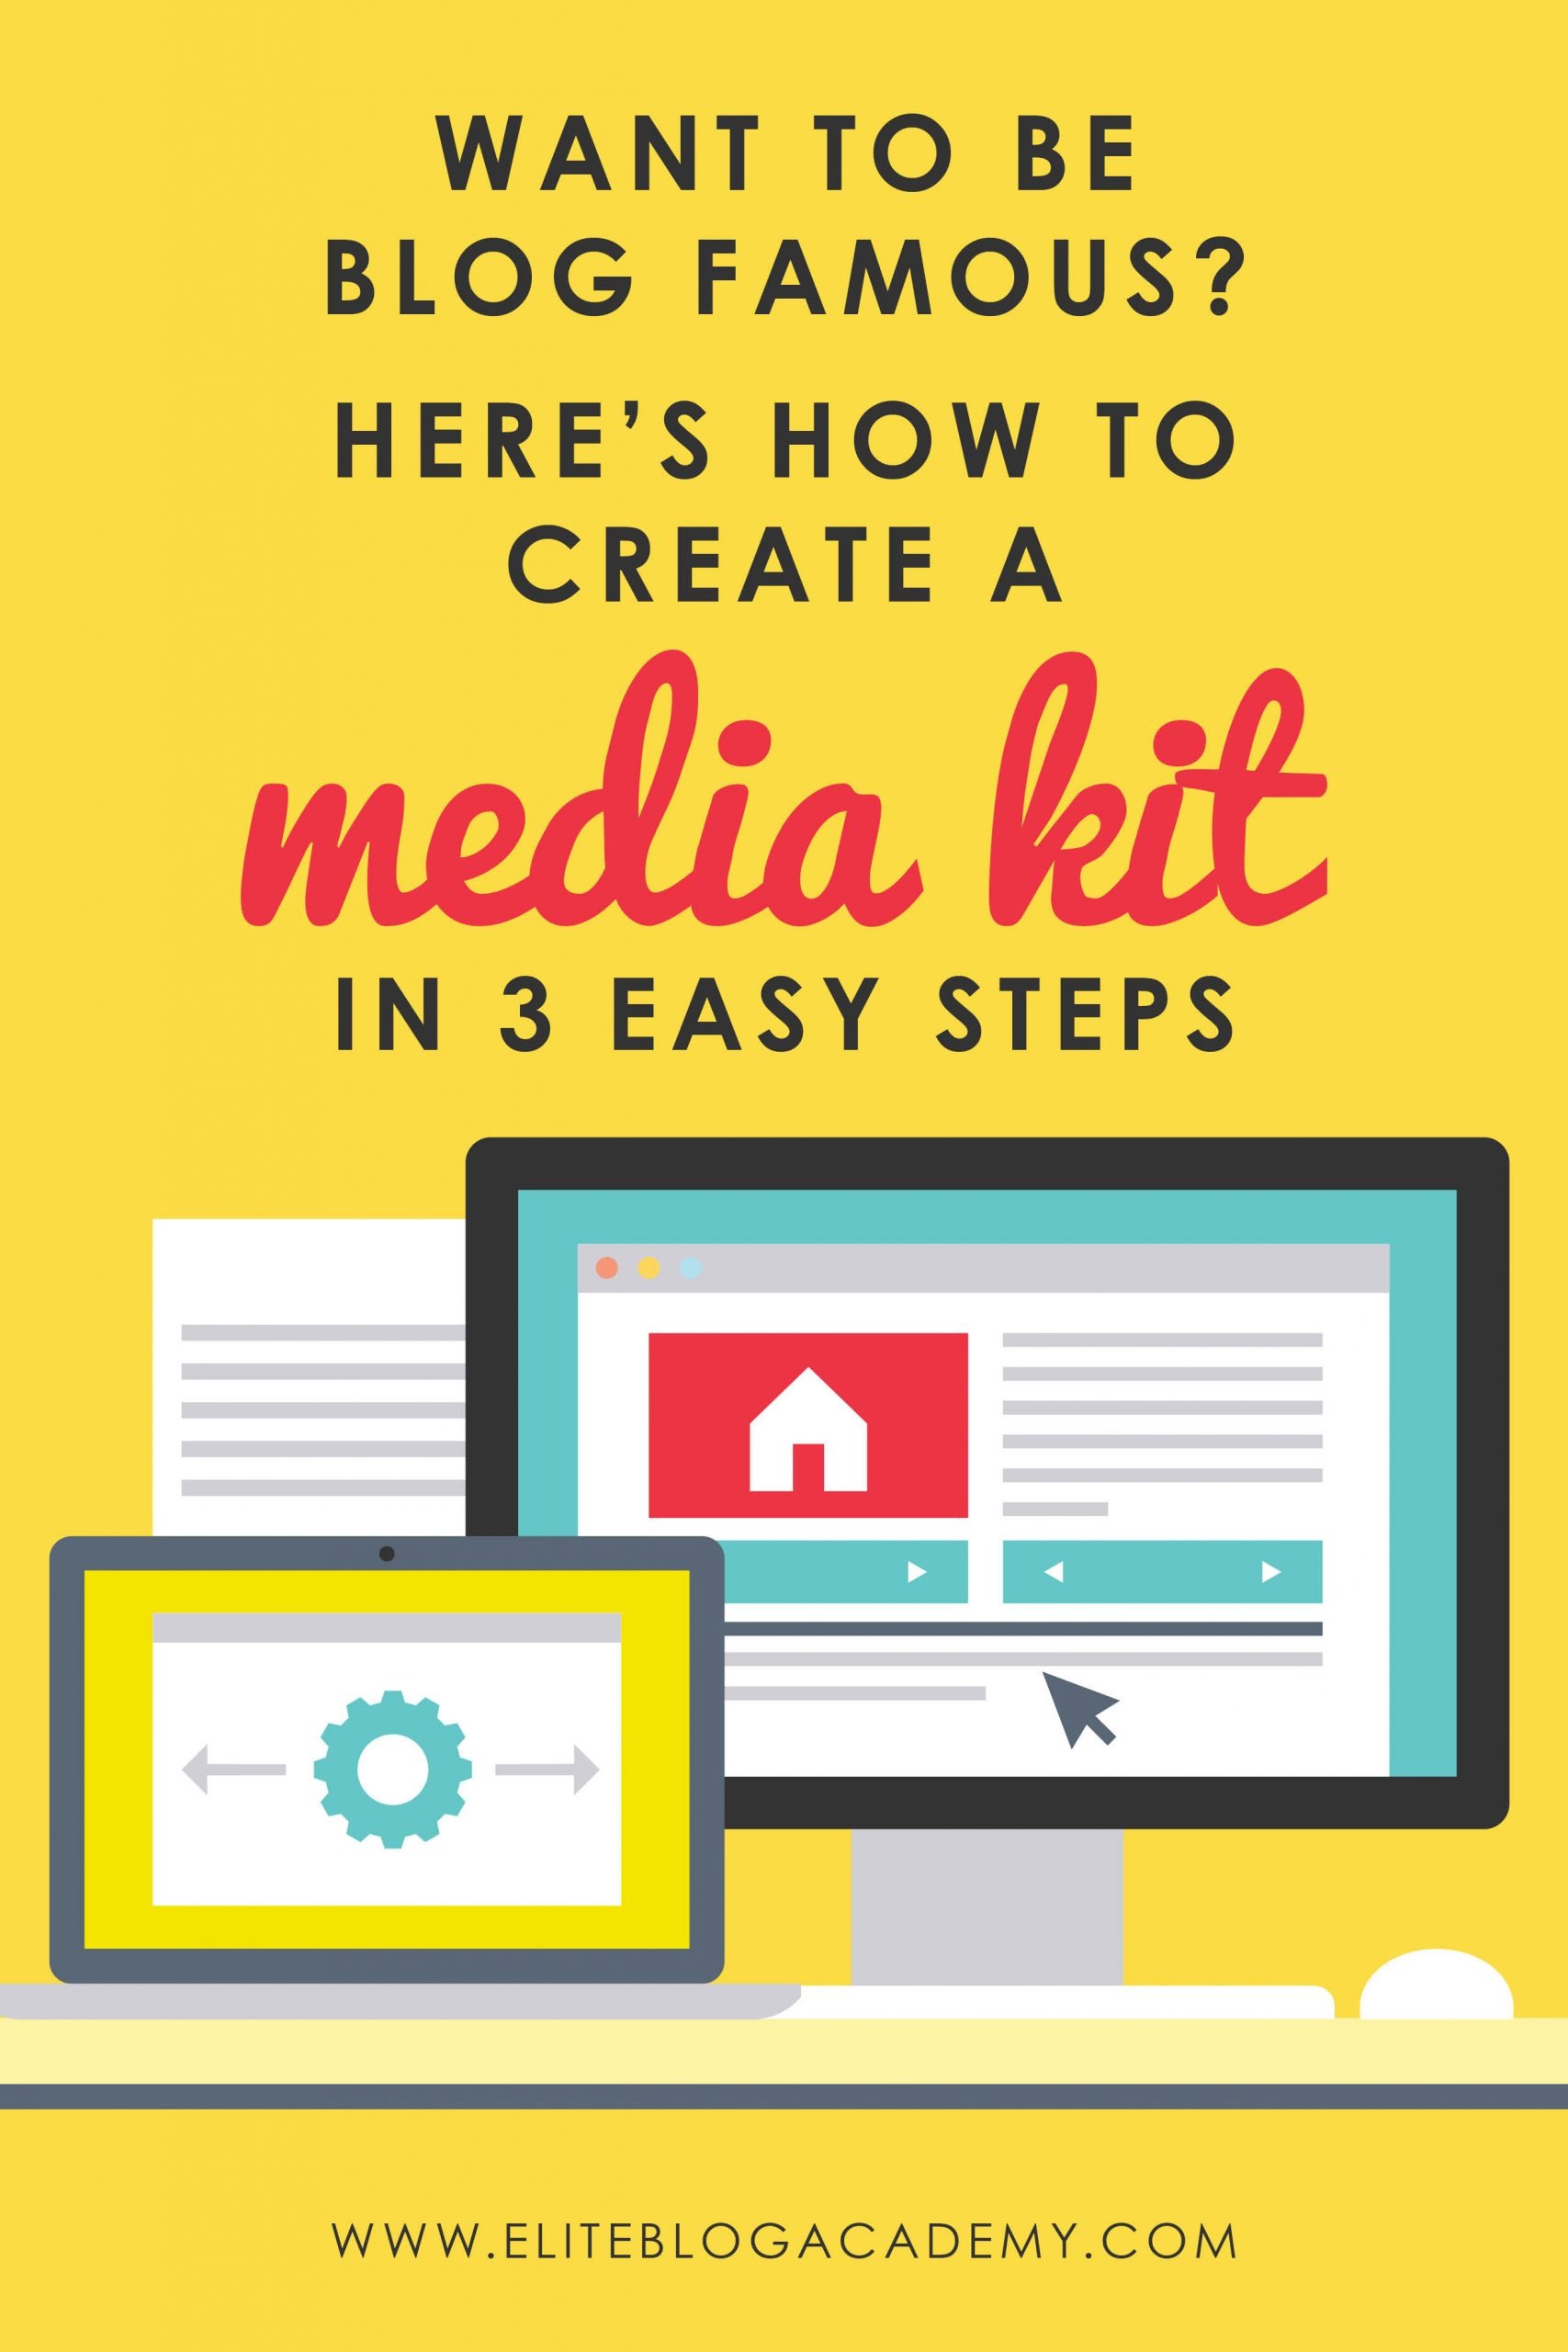 Ready to start treating your blog as business and begin working with brands? Having a media kit may seem overwhelming, here are 3 simple ways to create a media kit that will WOW prospective brands!